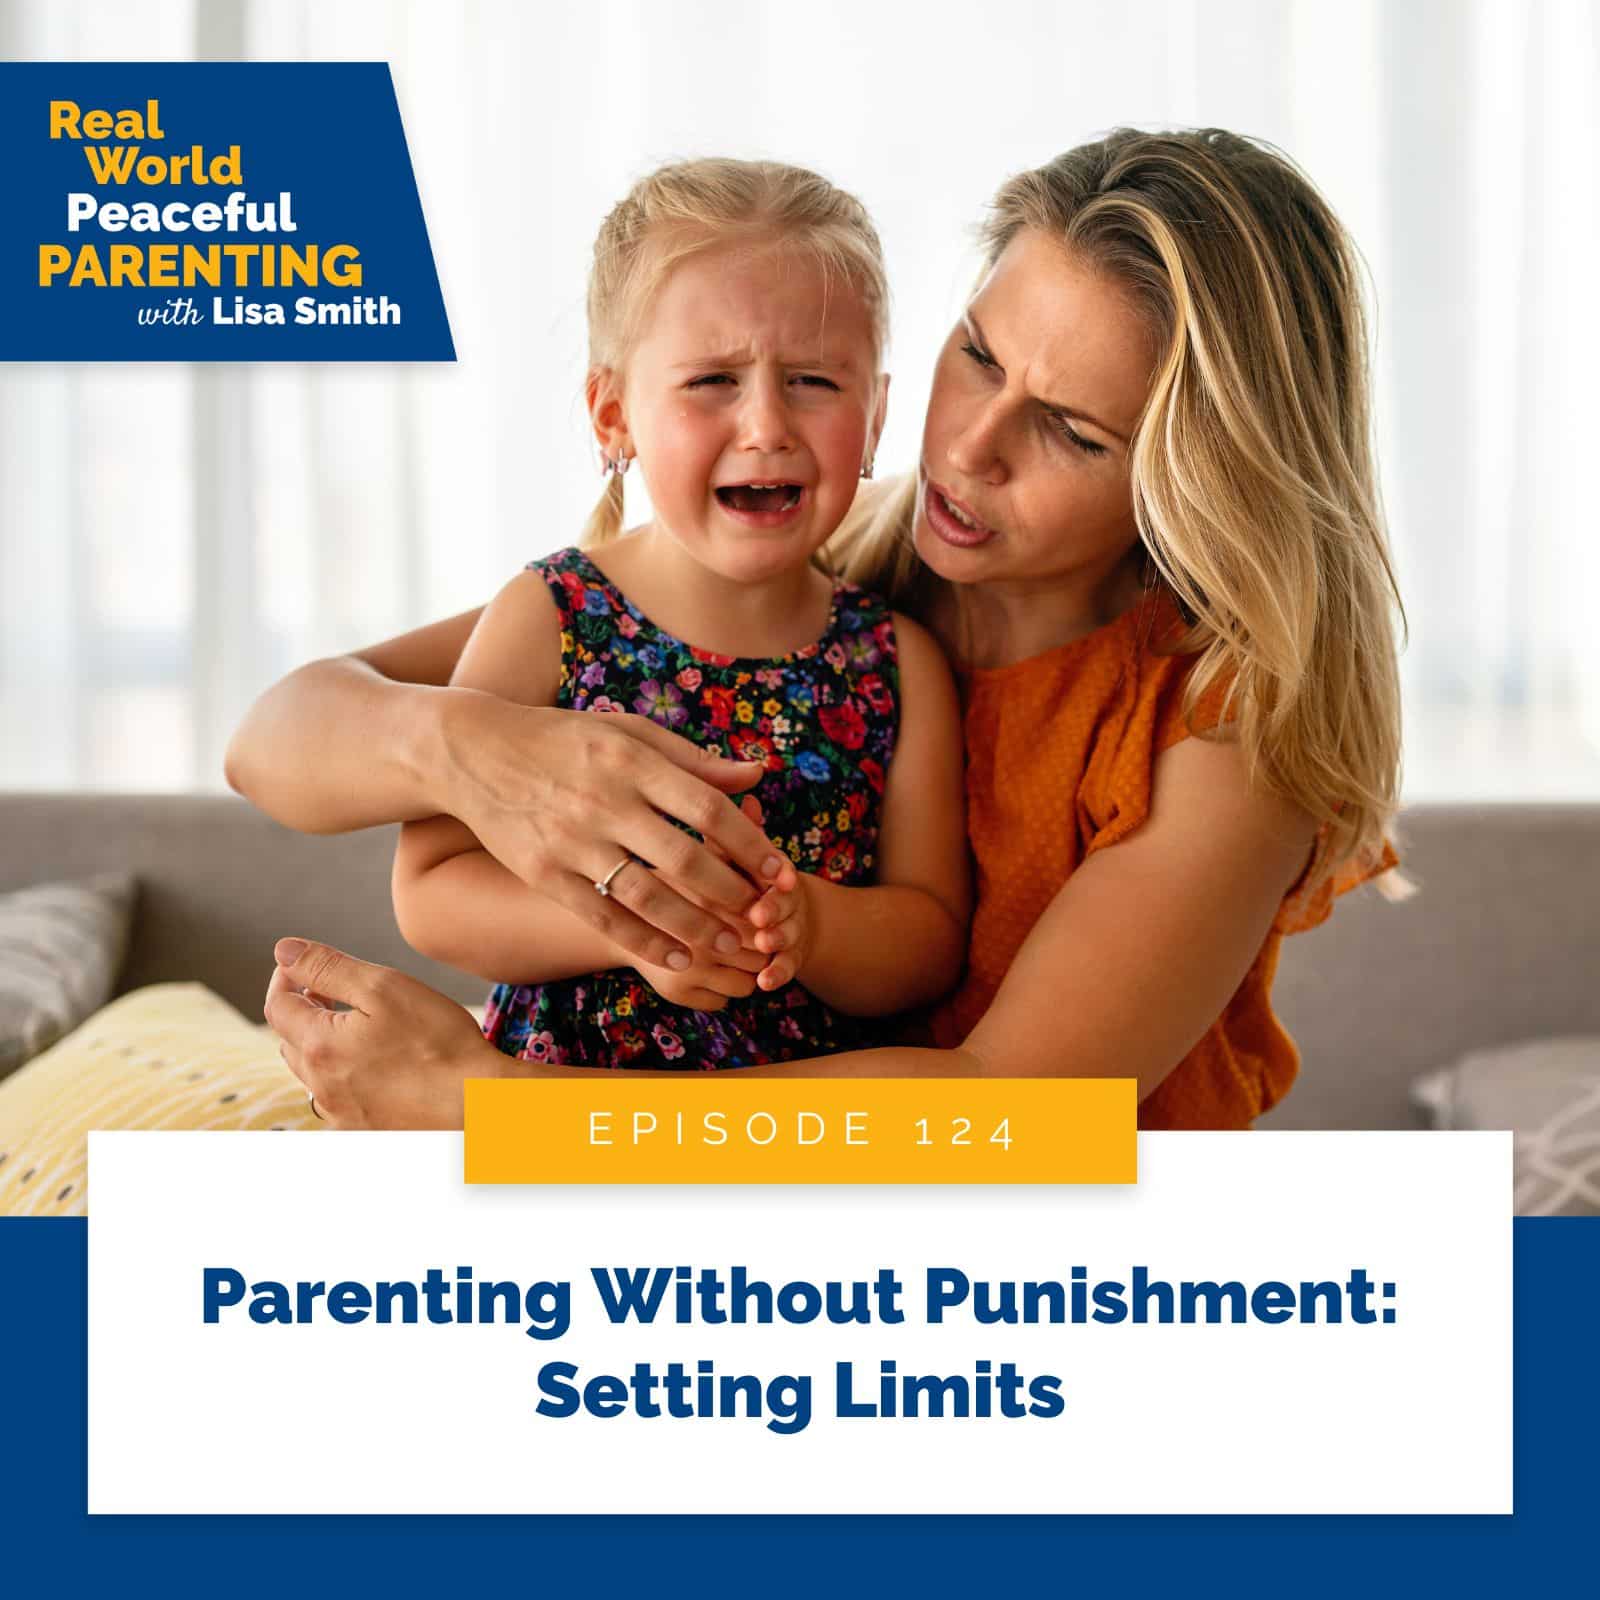 Real World Peaceful Parenting Lisa Smith | Parenting Without Punishment: Setting Limits